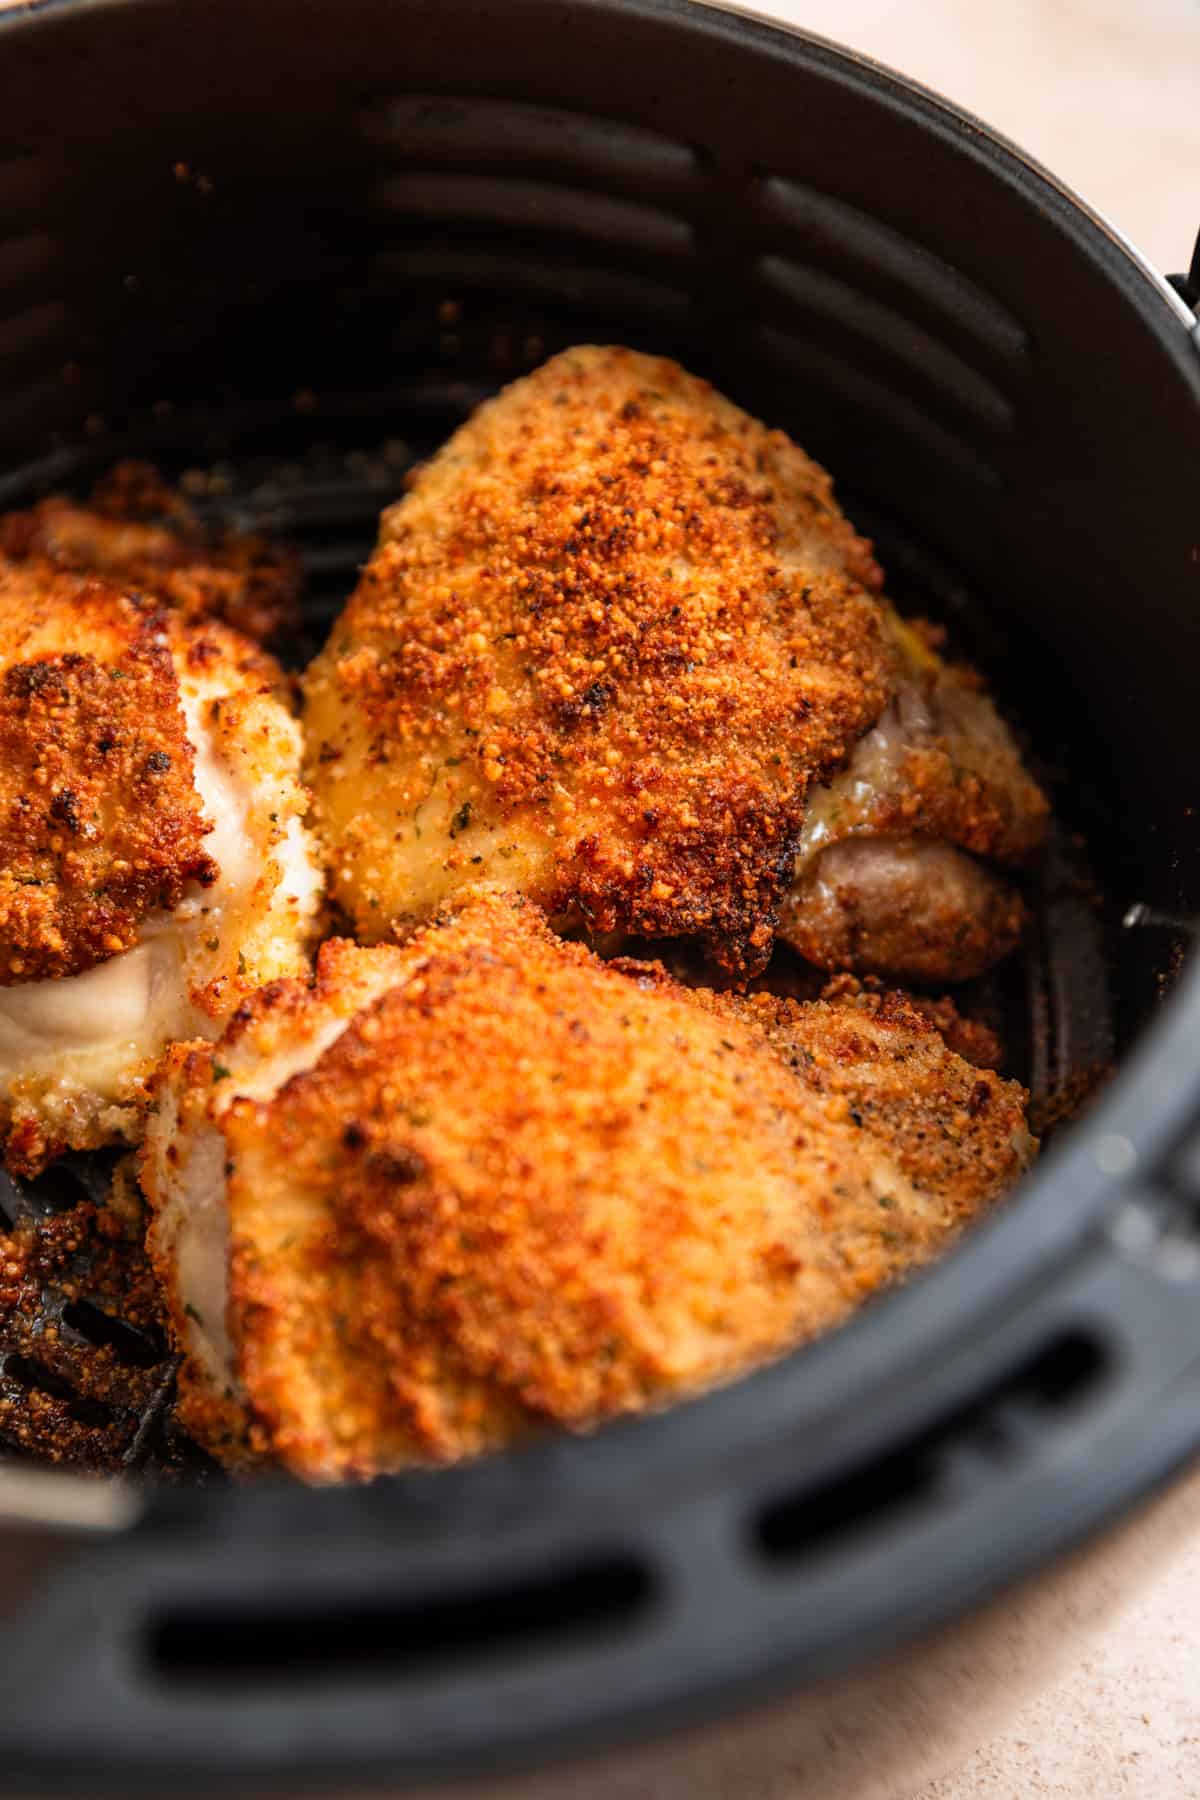 Air fryer basket with crispy breaded parmesan chicken thighs.